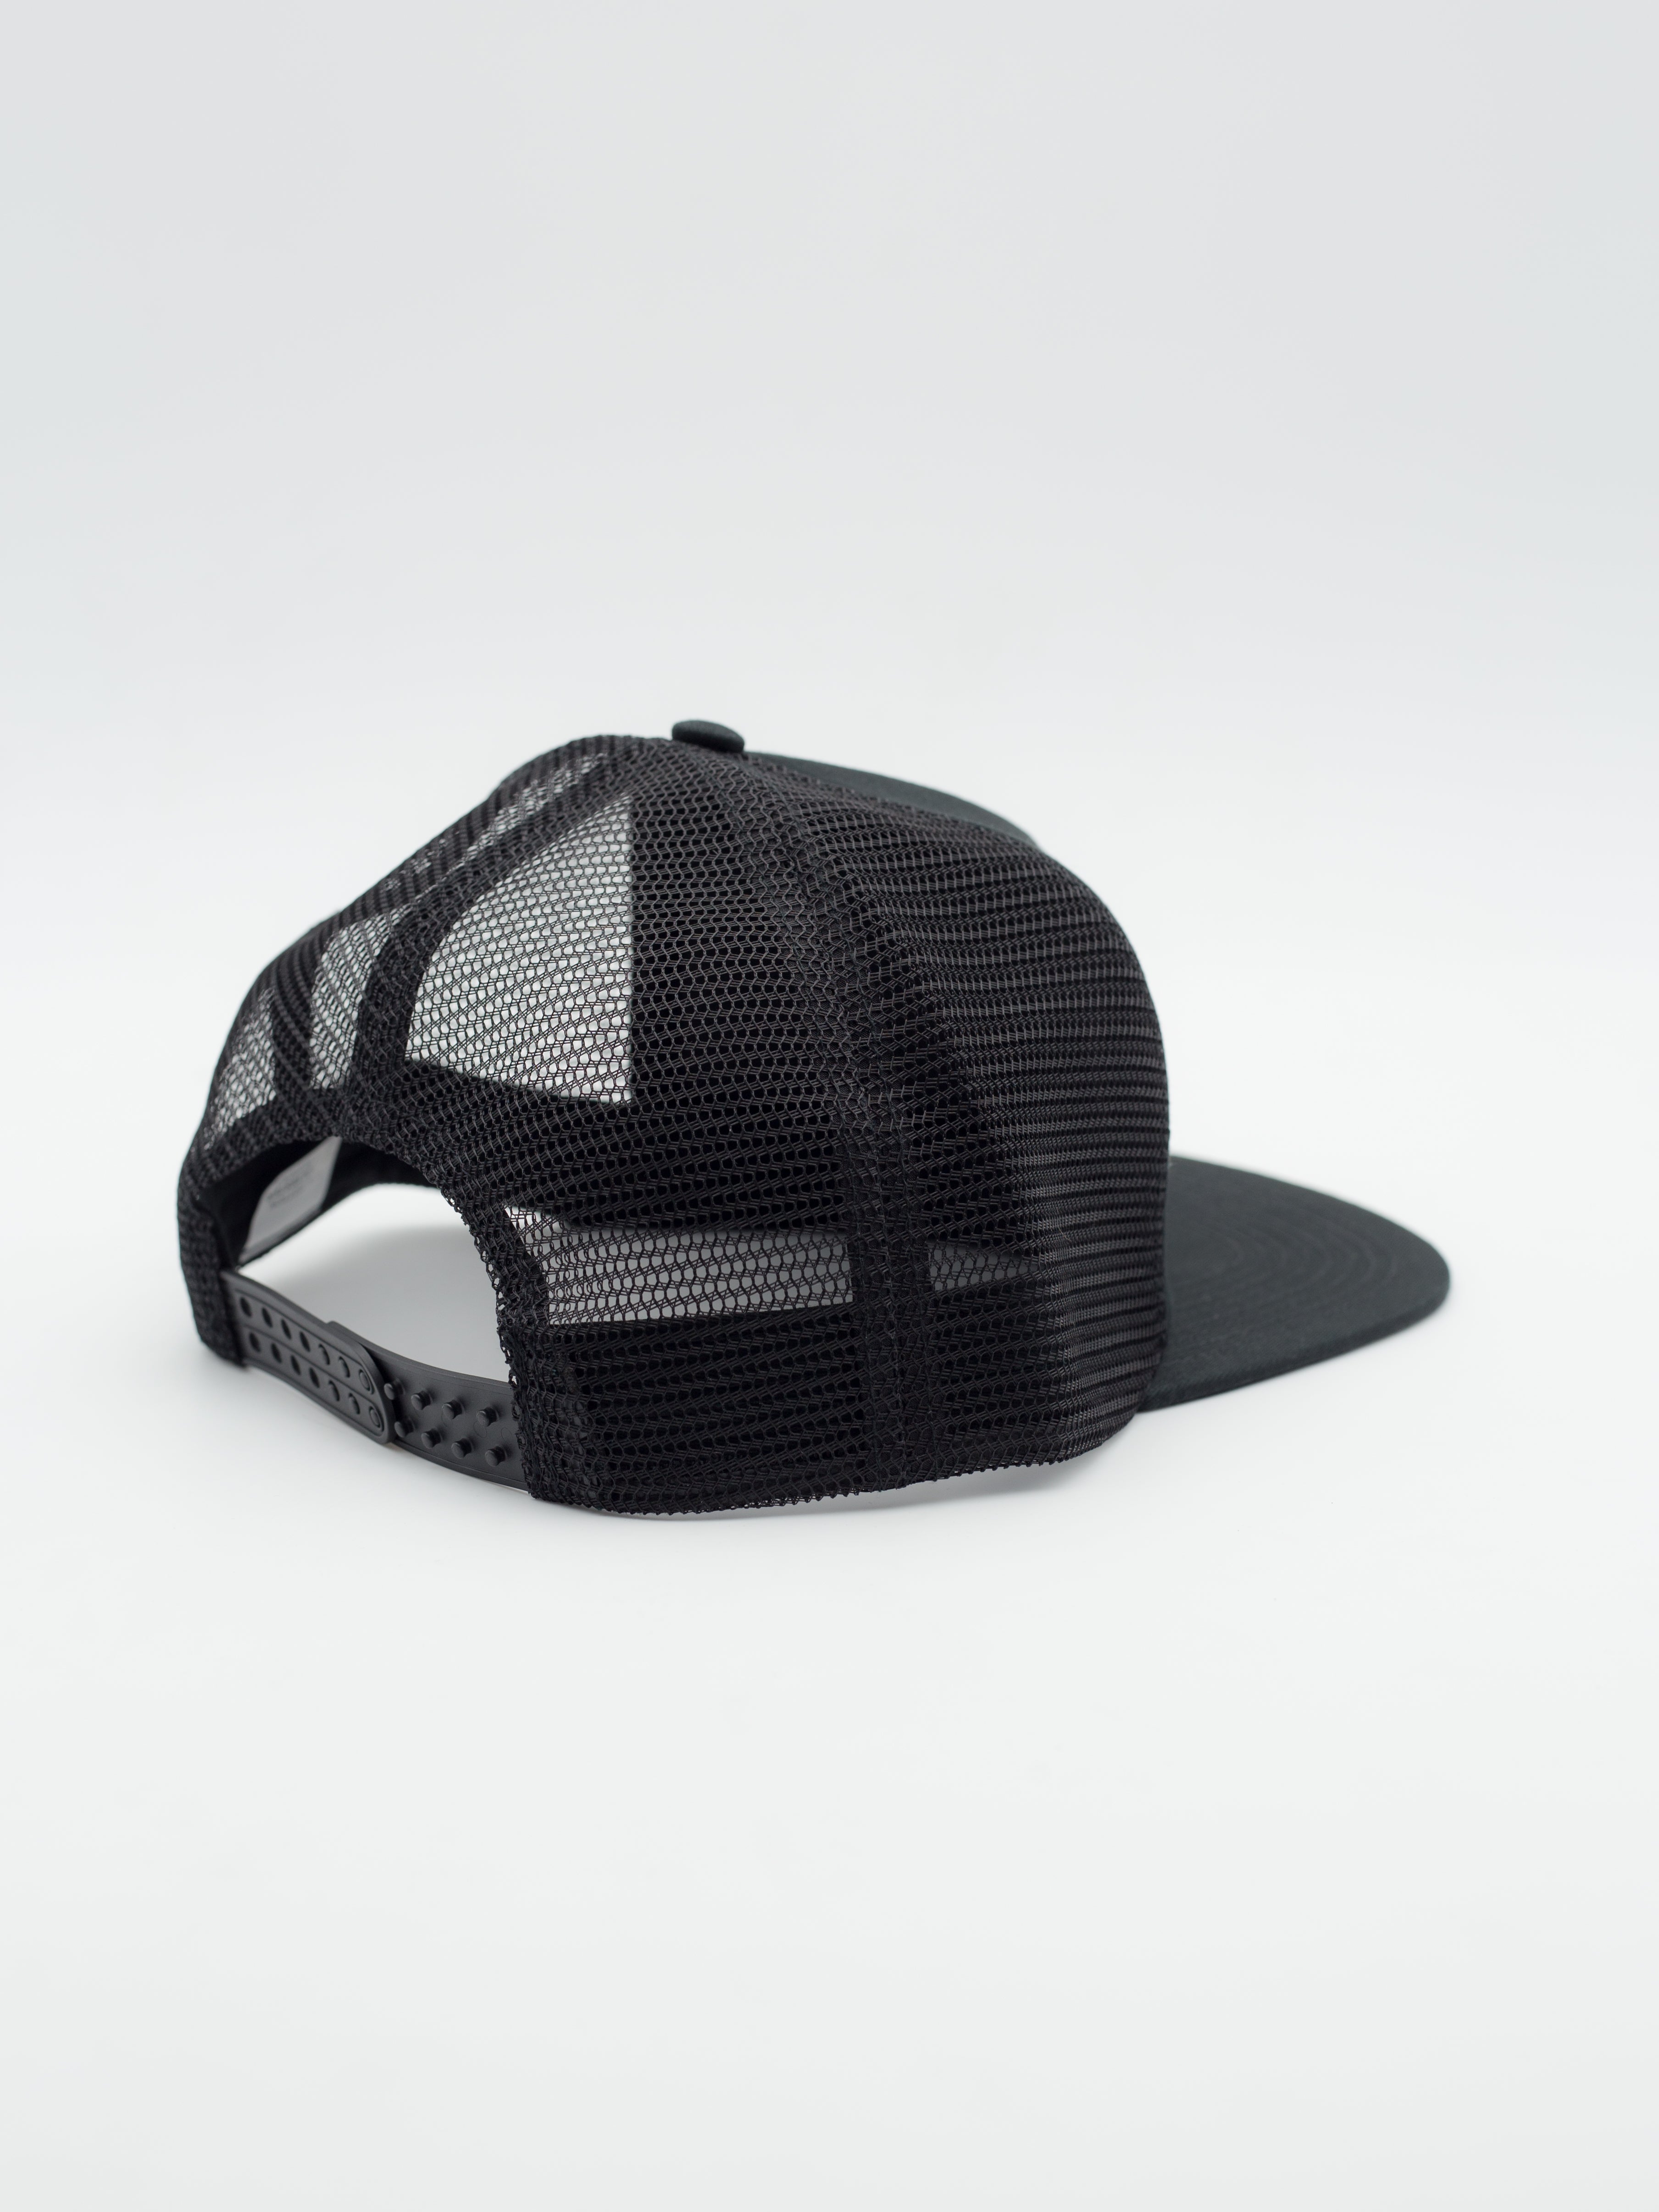 Flames Outlined Mesh Cap